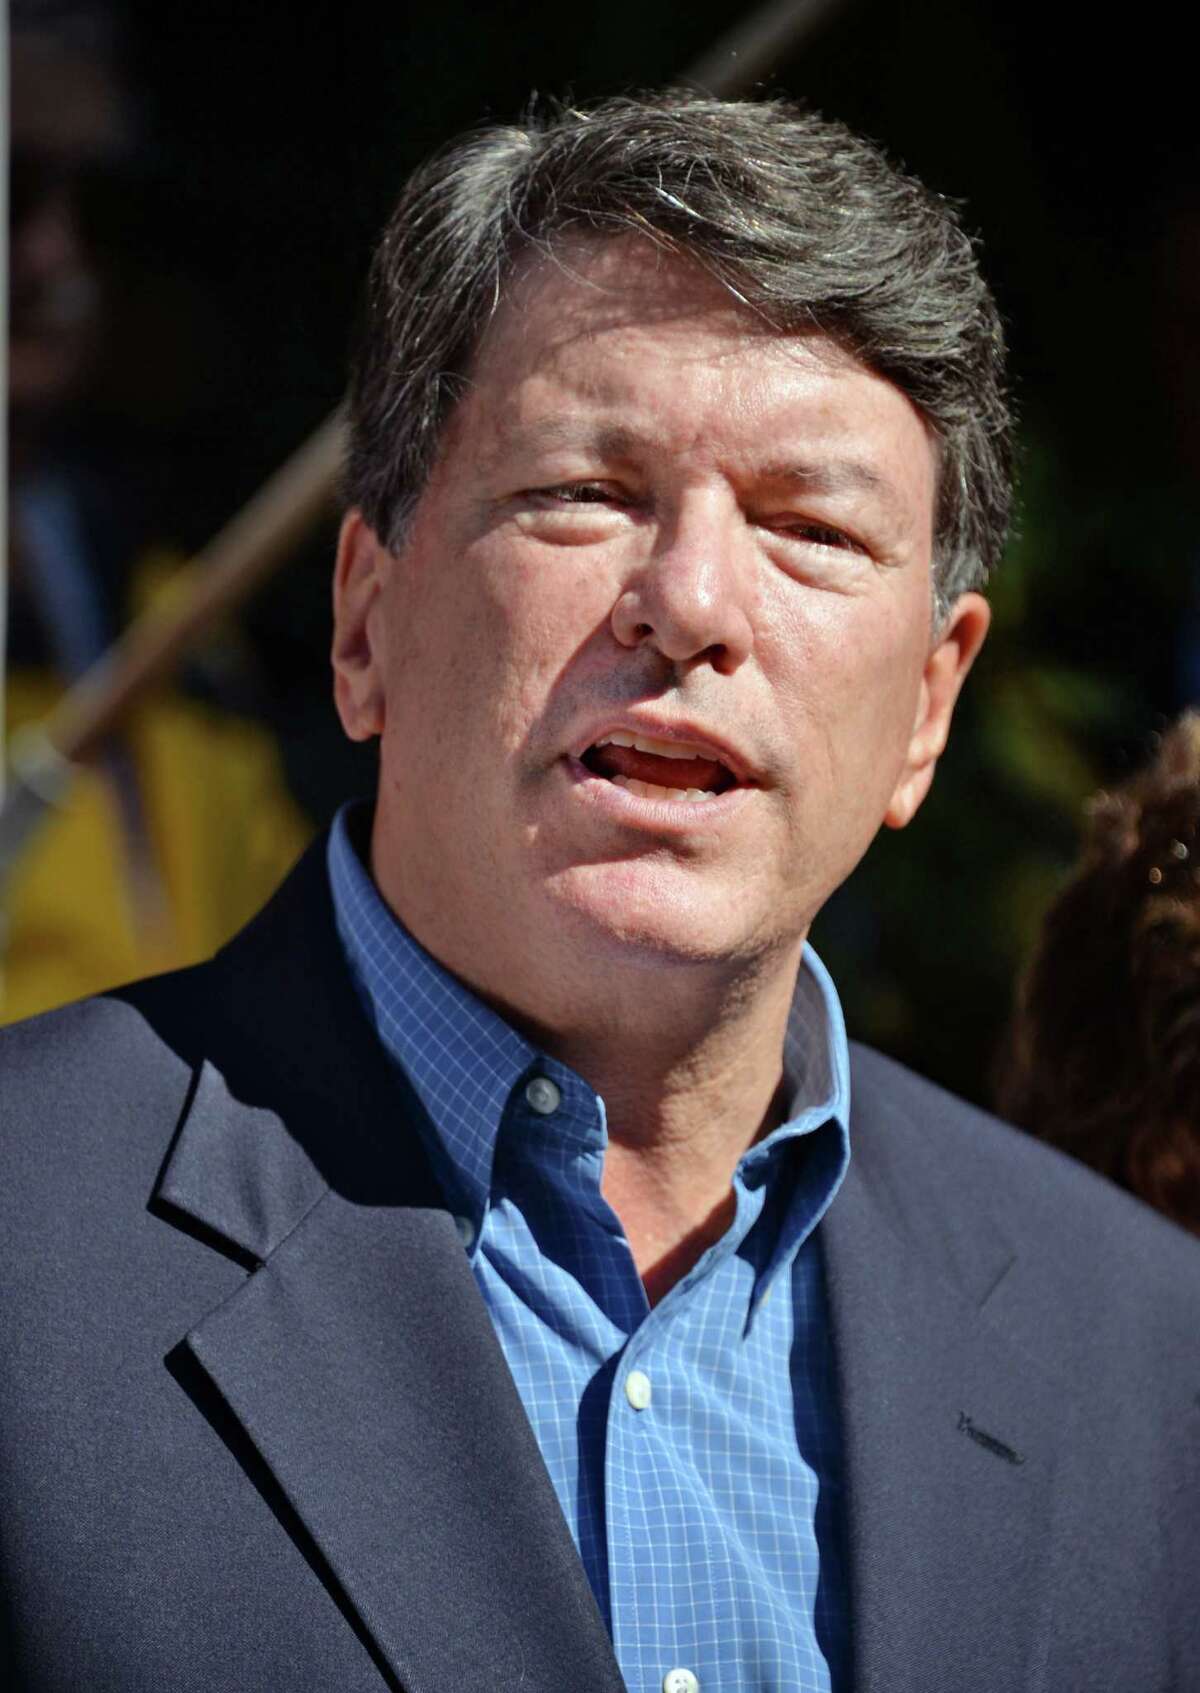 Republican John Faso formally announces his bid for Congress on the front steps of his home Tuesday Sept. 15, 2015 in Kinderhook, NY. (John Carl D'Annibale / Times Union)